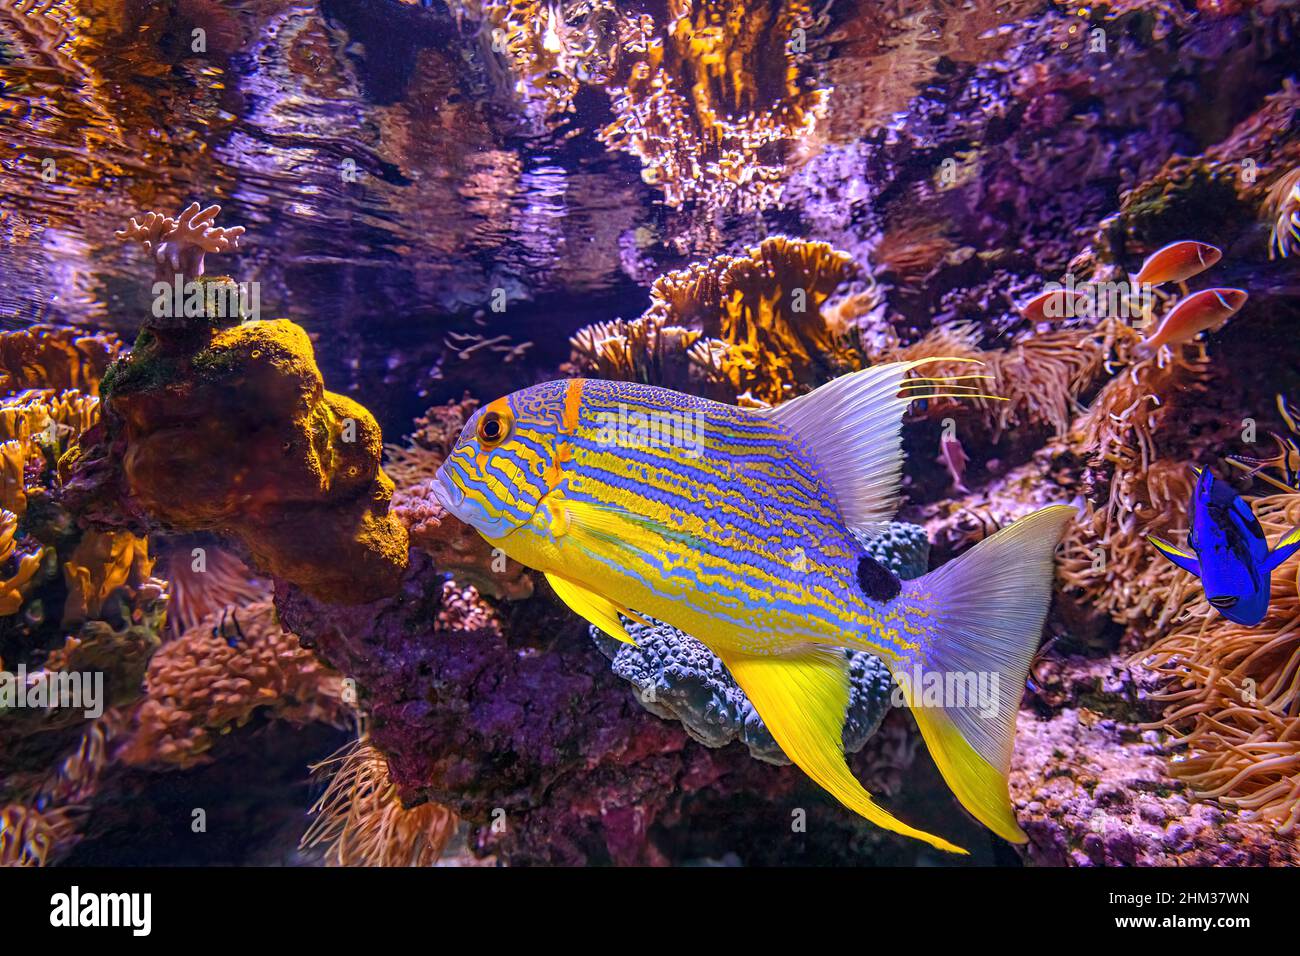 Close up of a Sailfin snapper fish or blue-lined sea bream in coral reef. Symphorichthys spilurus species living in Indian Ocean and western Pacific Stock Photo